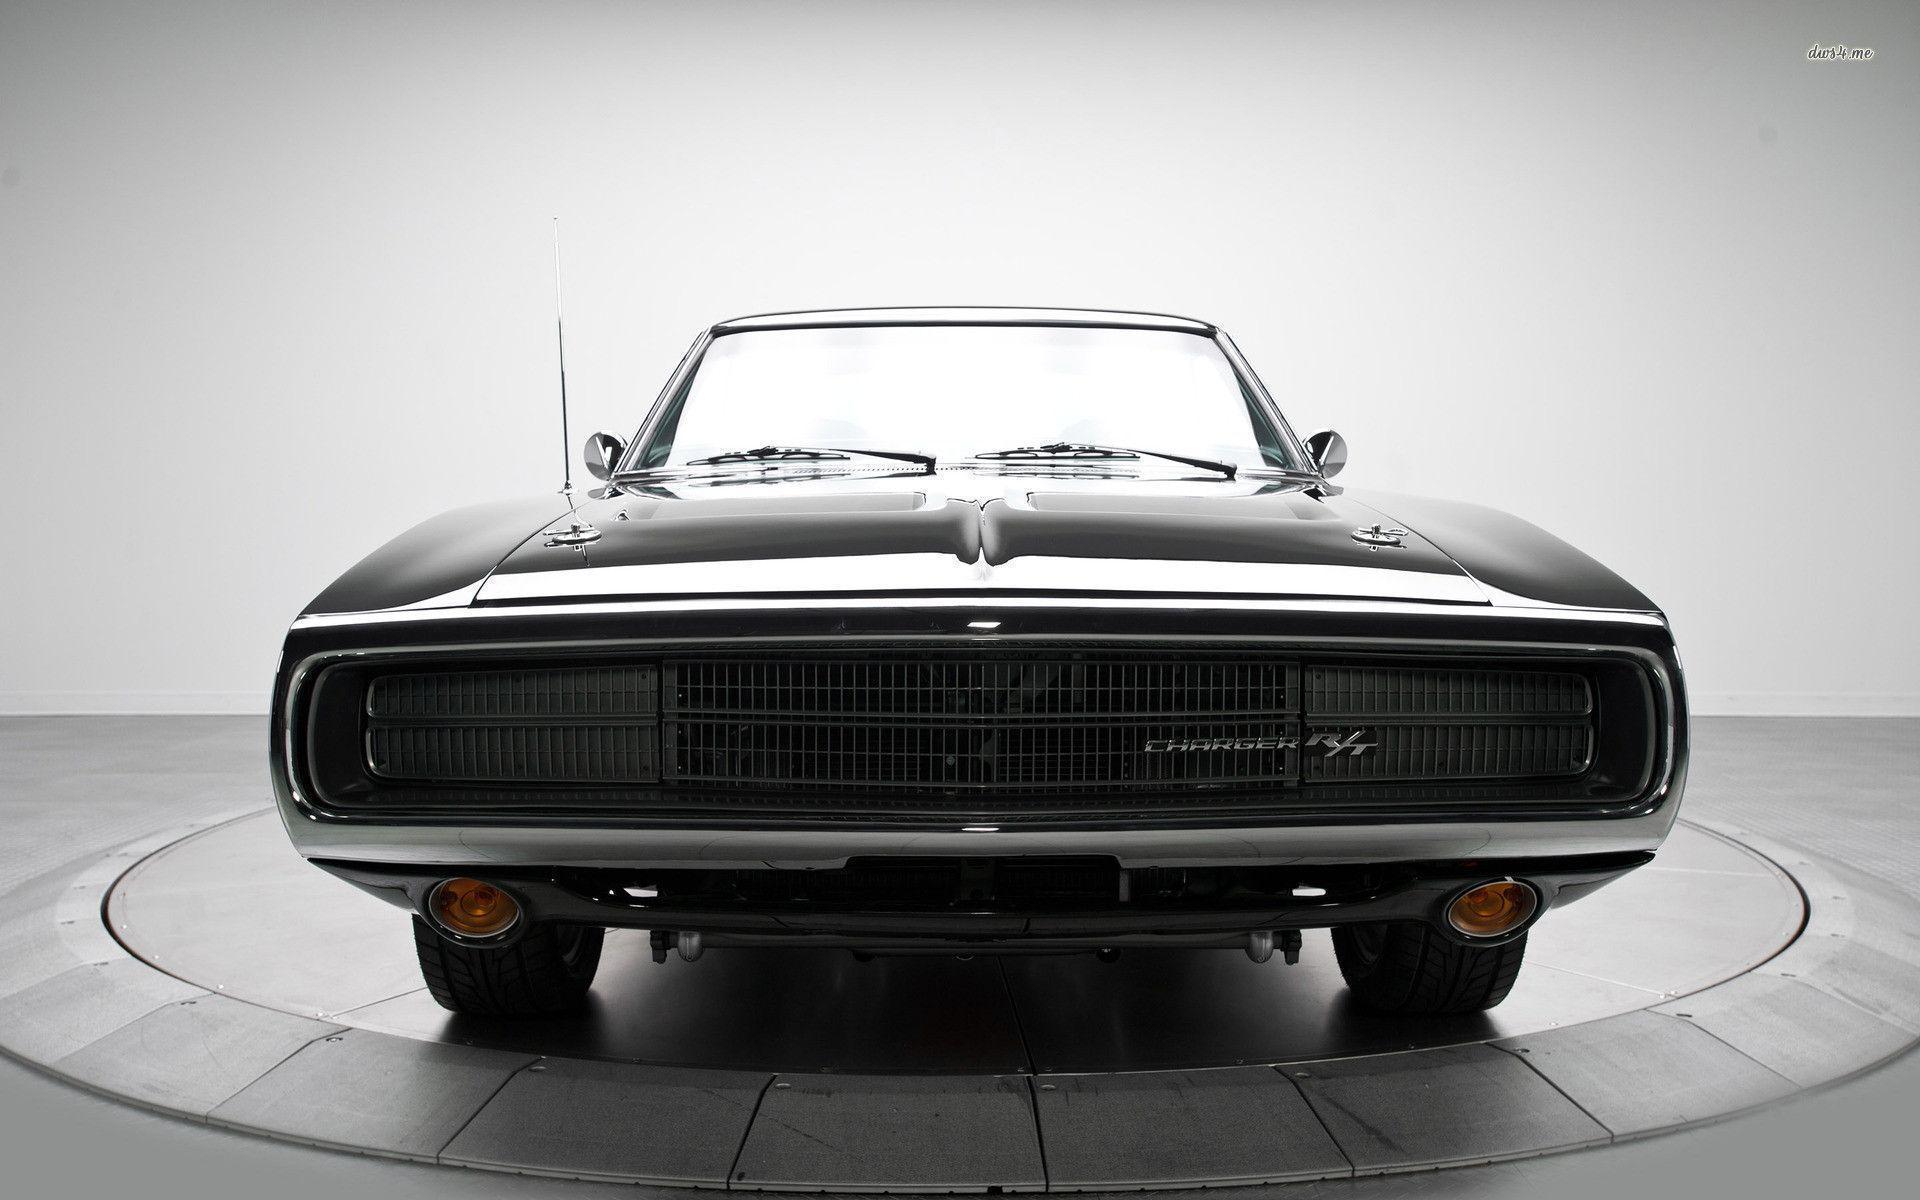 Dodge Charger Wallpaper Full HD Wallpaper Search